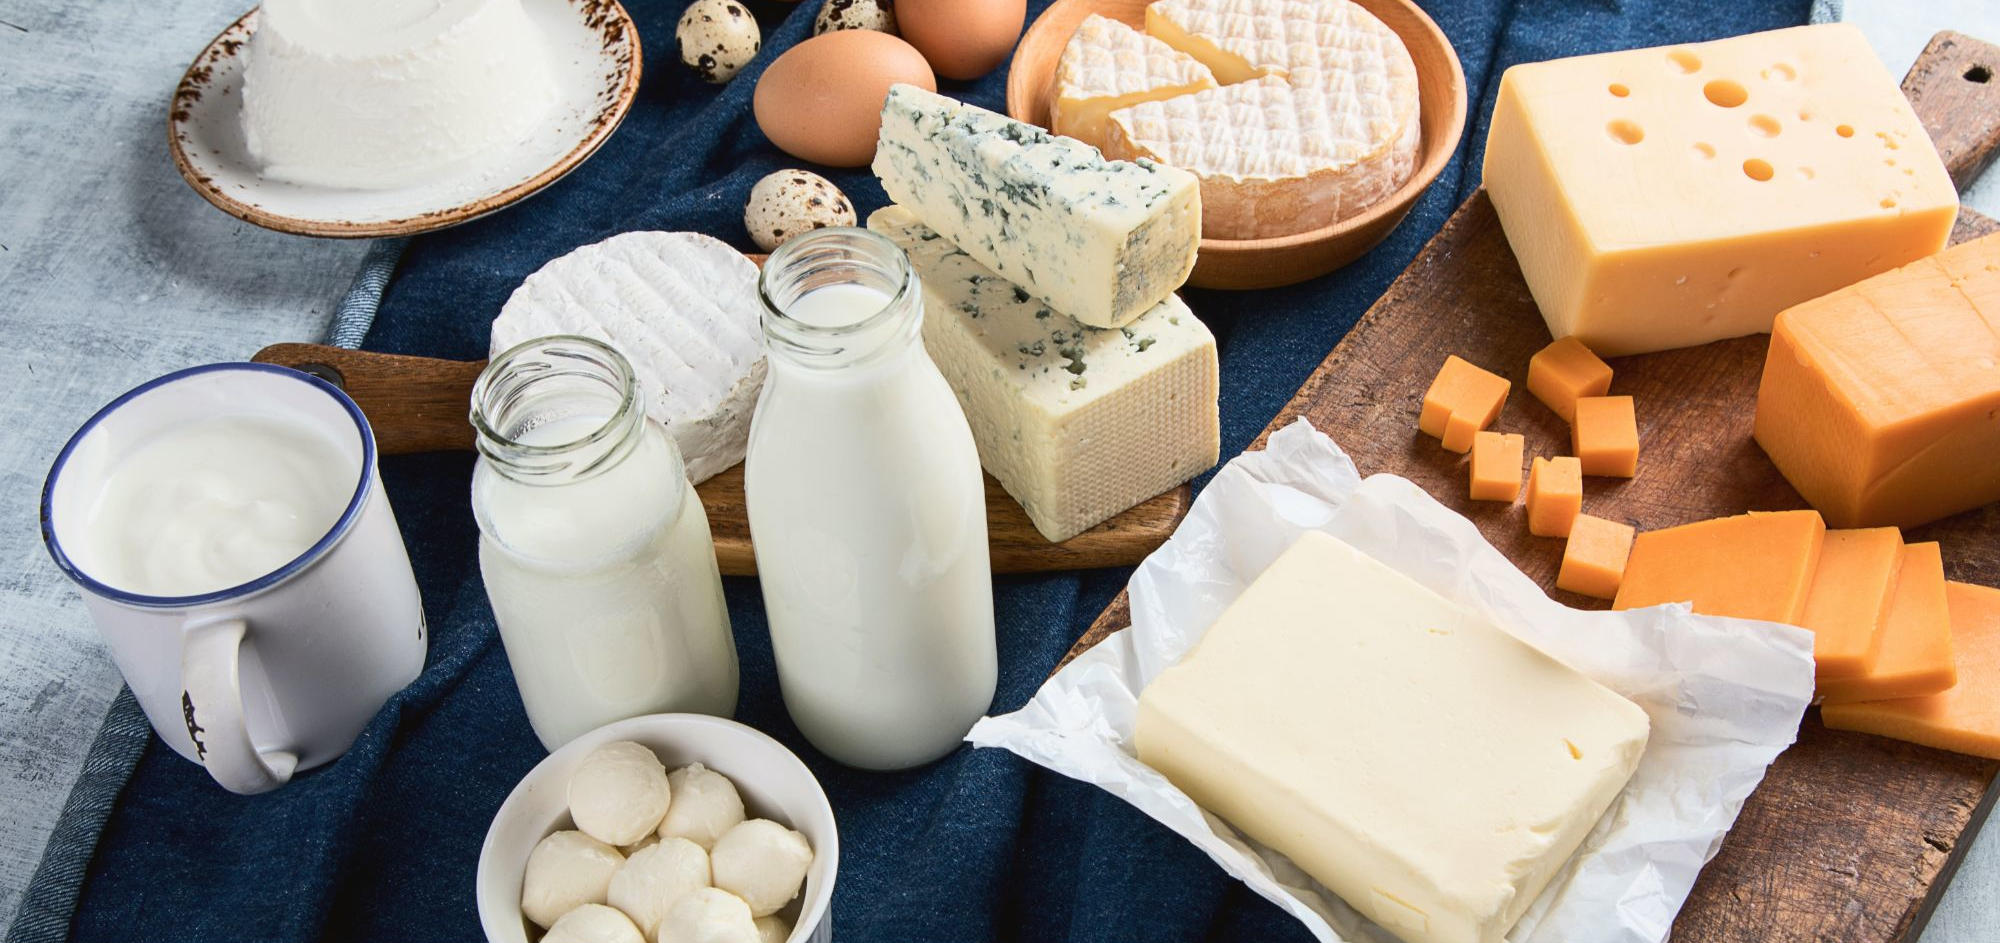 New Research Challenges Advice To Limit High-Fat Dairy Foods